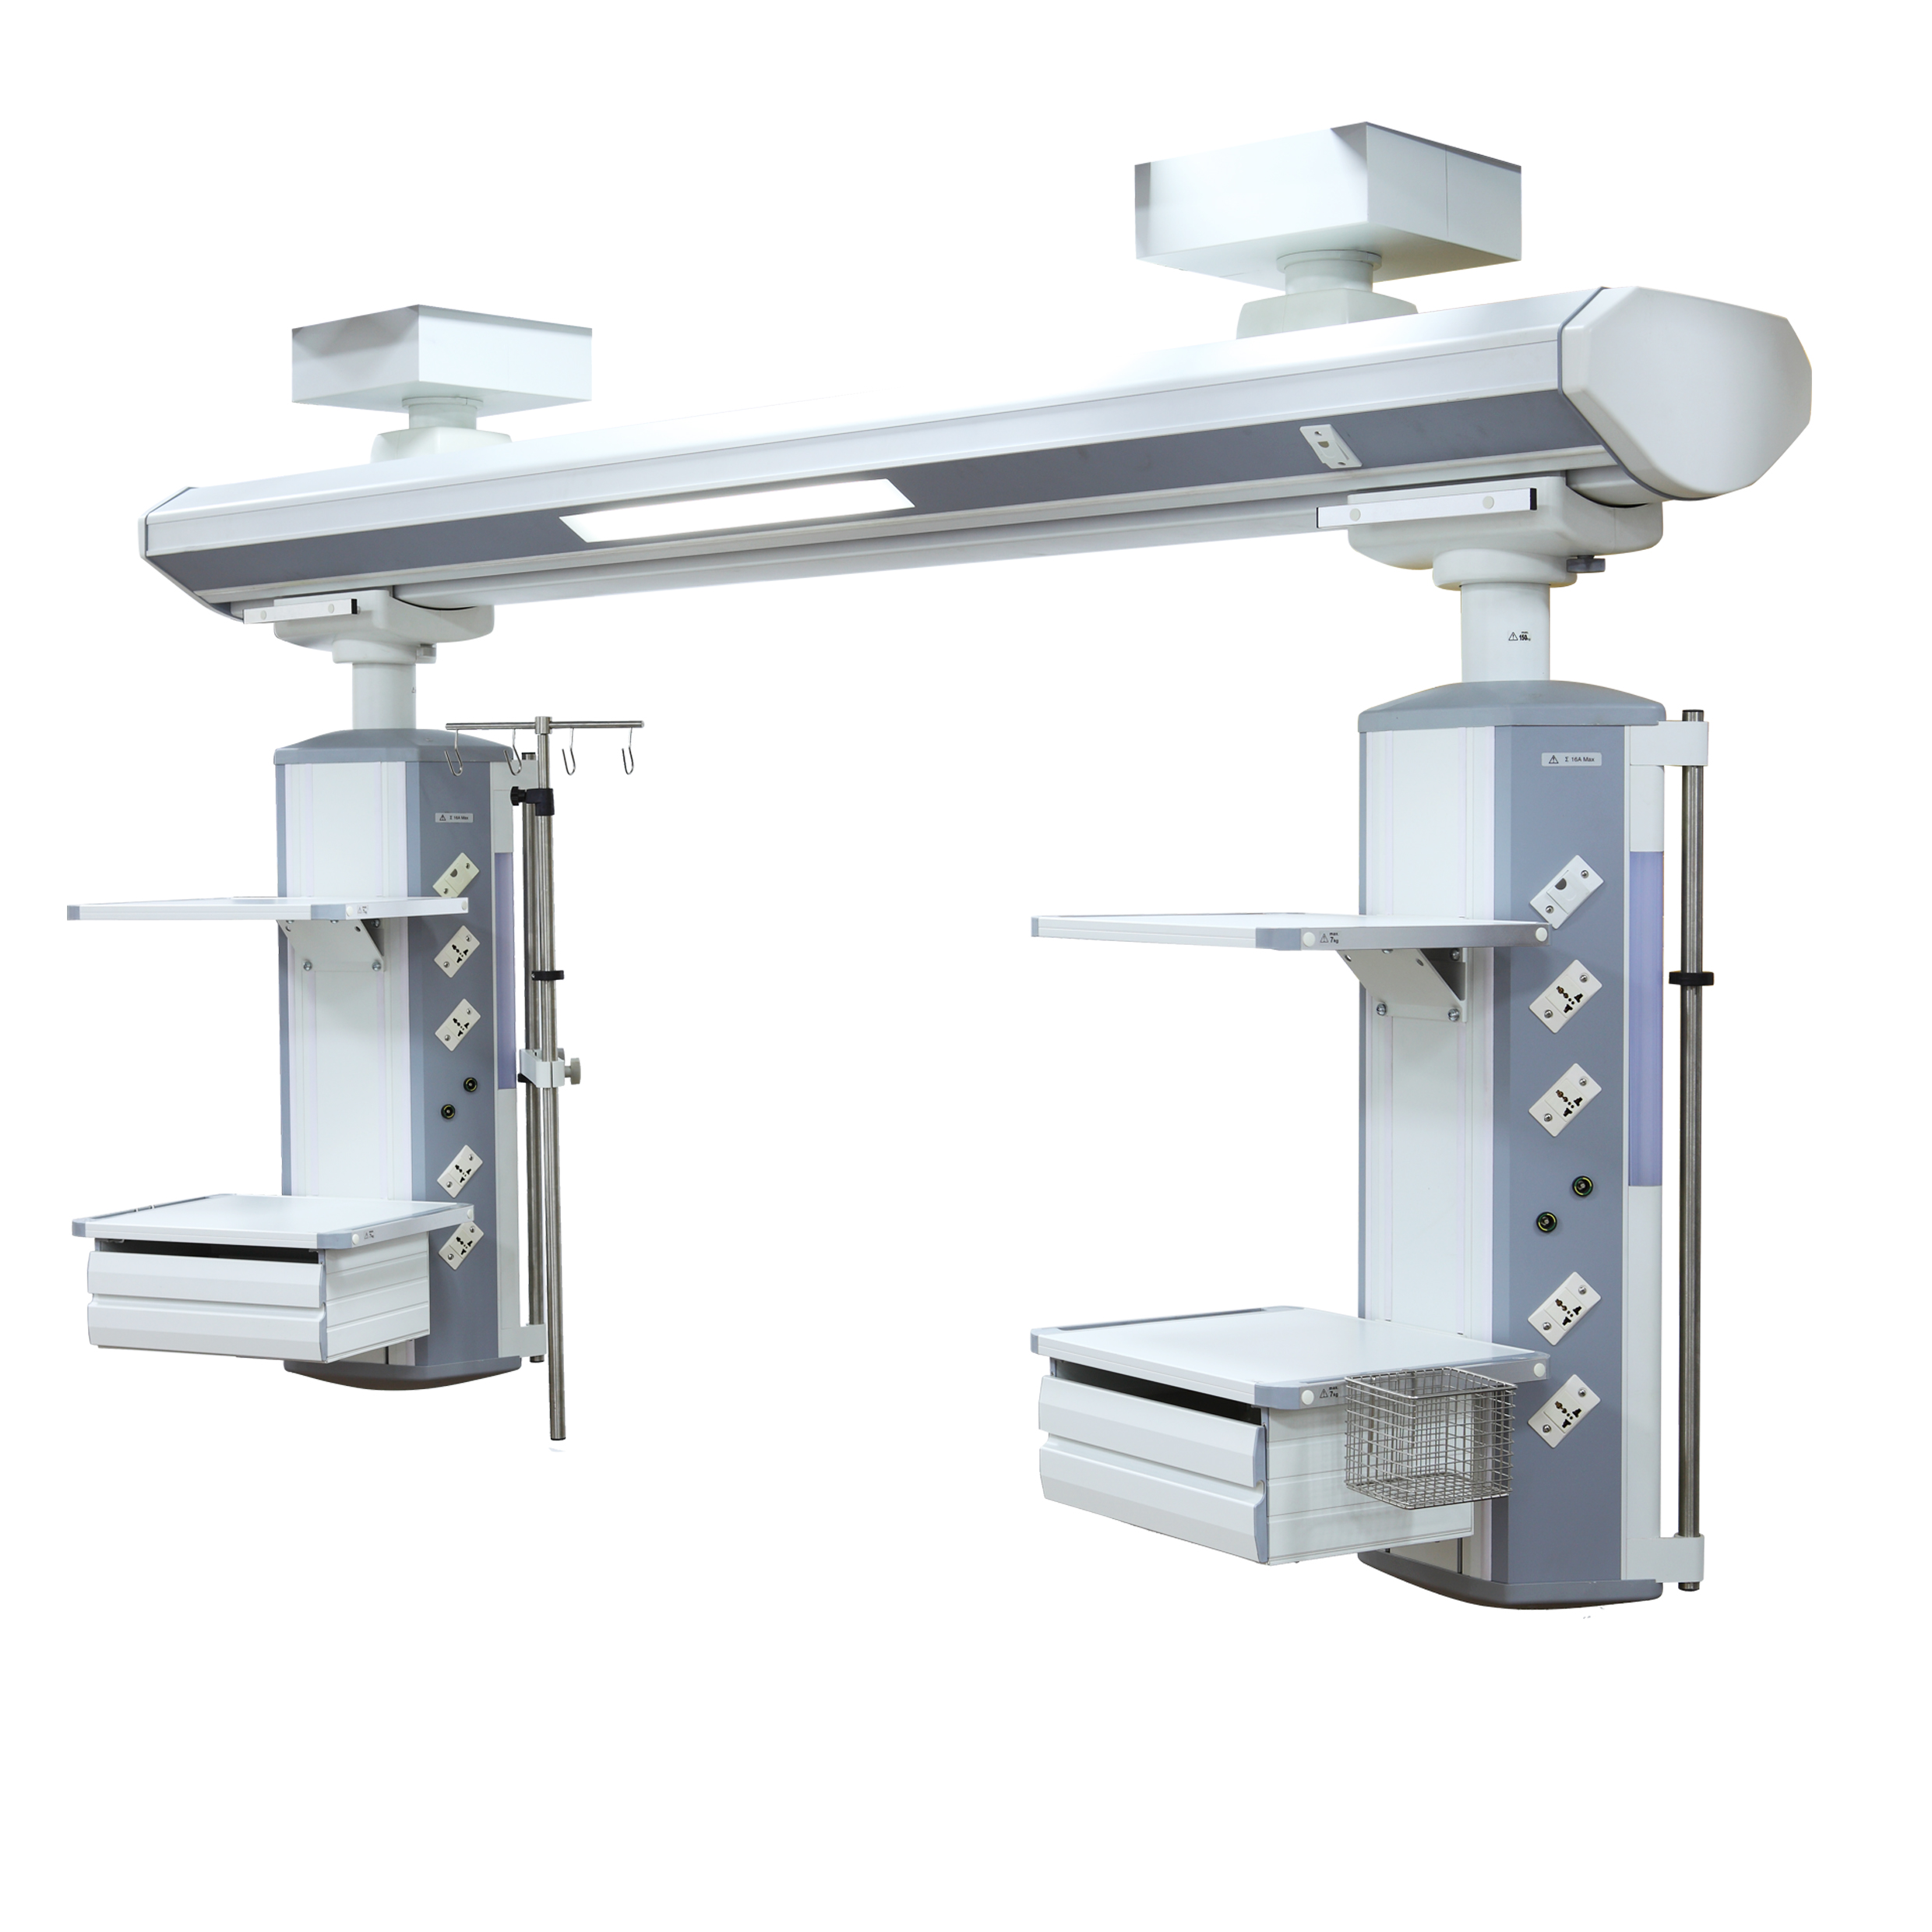 Hot sale Hydraulic Operating Table - Two Arm Ceiling Mounted Bridge Pendant For ICU – Figton